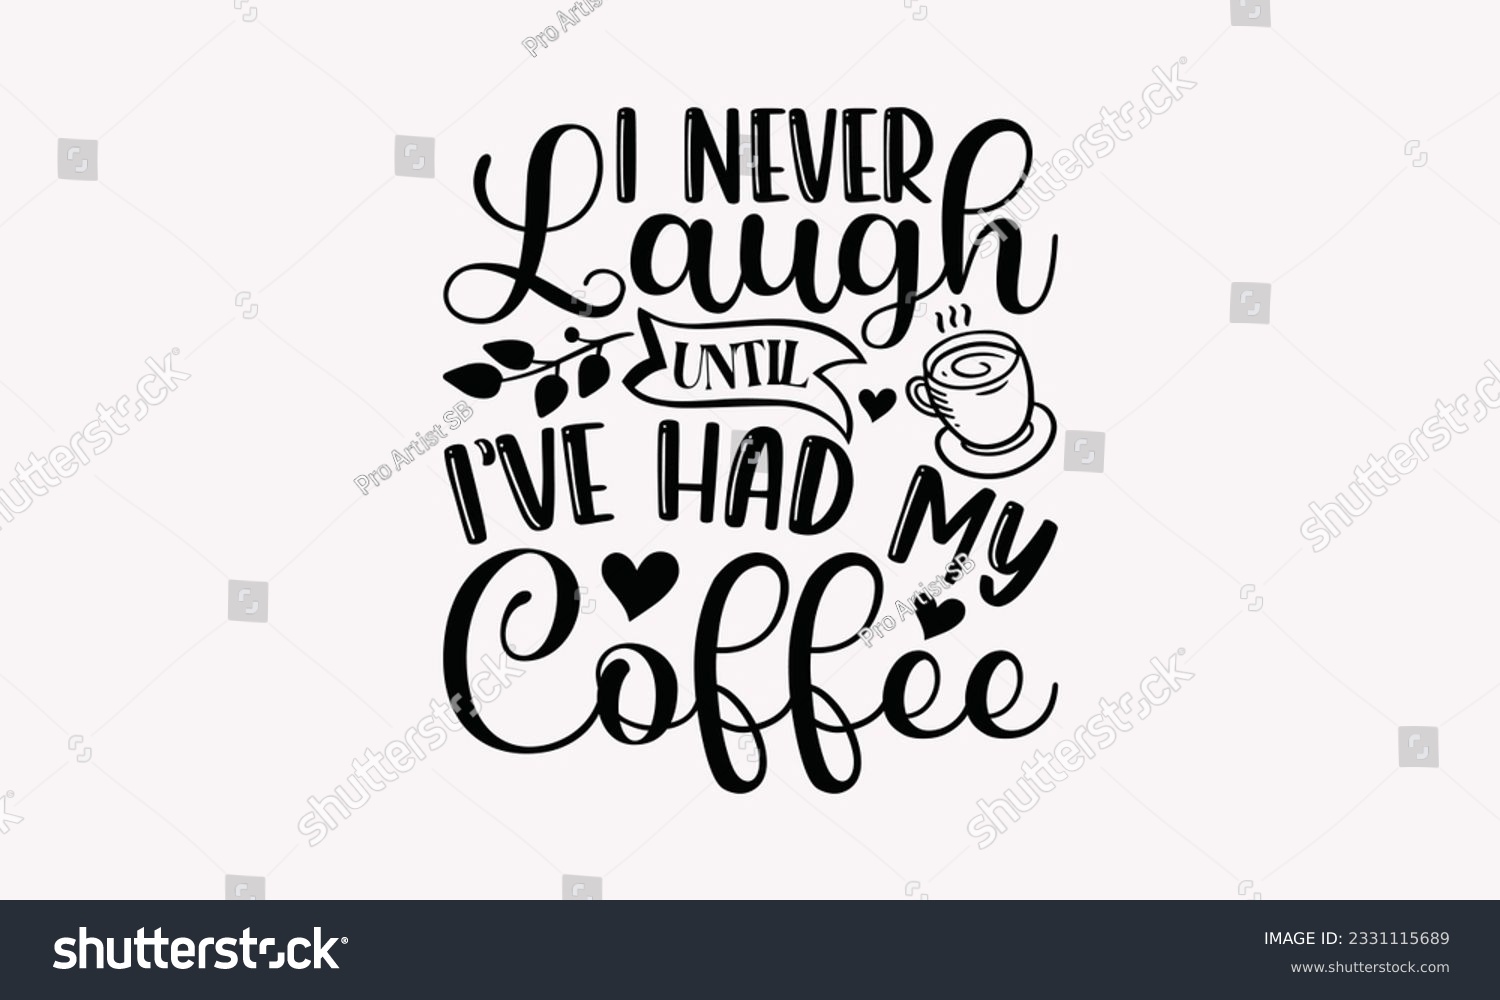 SVG of I never laugh until I’ve had my coffee - Coffee SVG Design Template, Drink Quotes, Calligraphy graphic design, Typography poster with old style camera and quote. svg